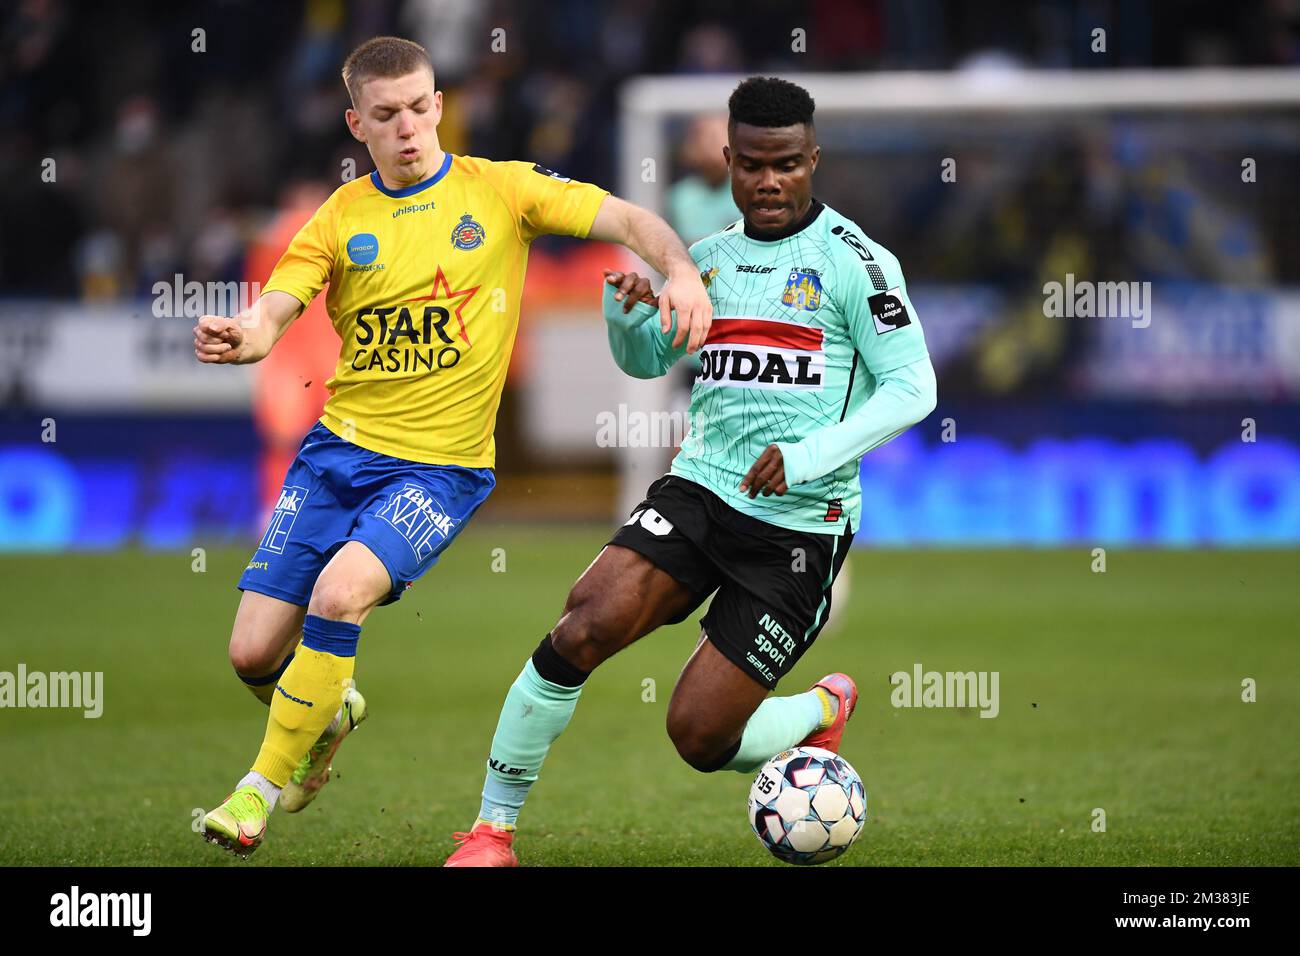 Waasland-Beveren's Tom Reyners and Westerlo's Kouya Mabea fight for the ball during a soccer match between Waasland-Beveren and KVC Westerlo, Sunday 30 January 2022 in Beveren, on day 18 of the '1B Pro League' second division of the Belgian soccer championship. BELGA PHOTO JOHN THYS Stock Photo